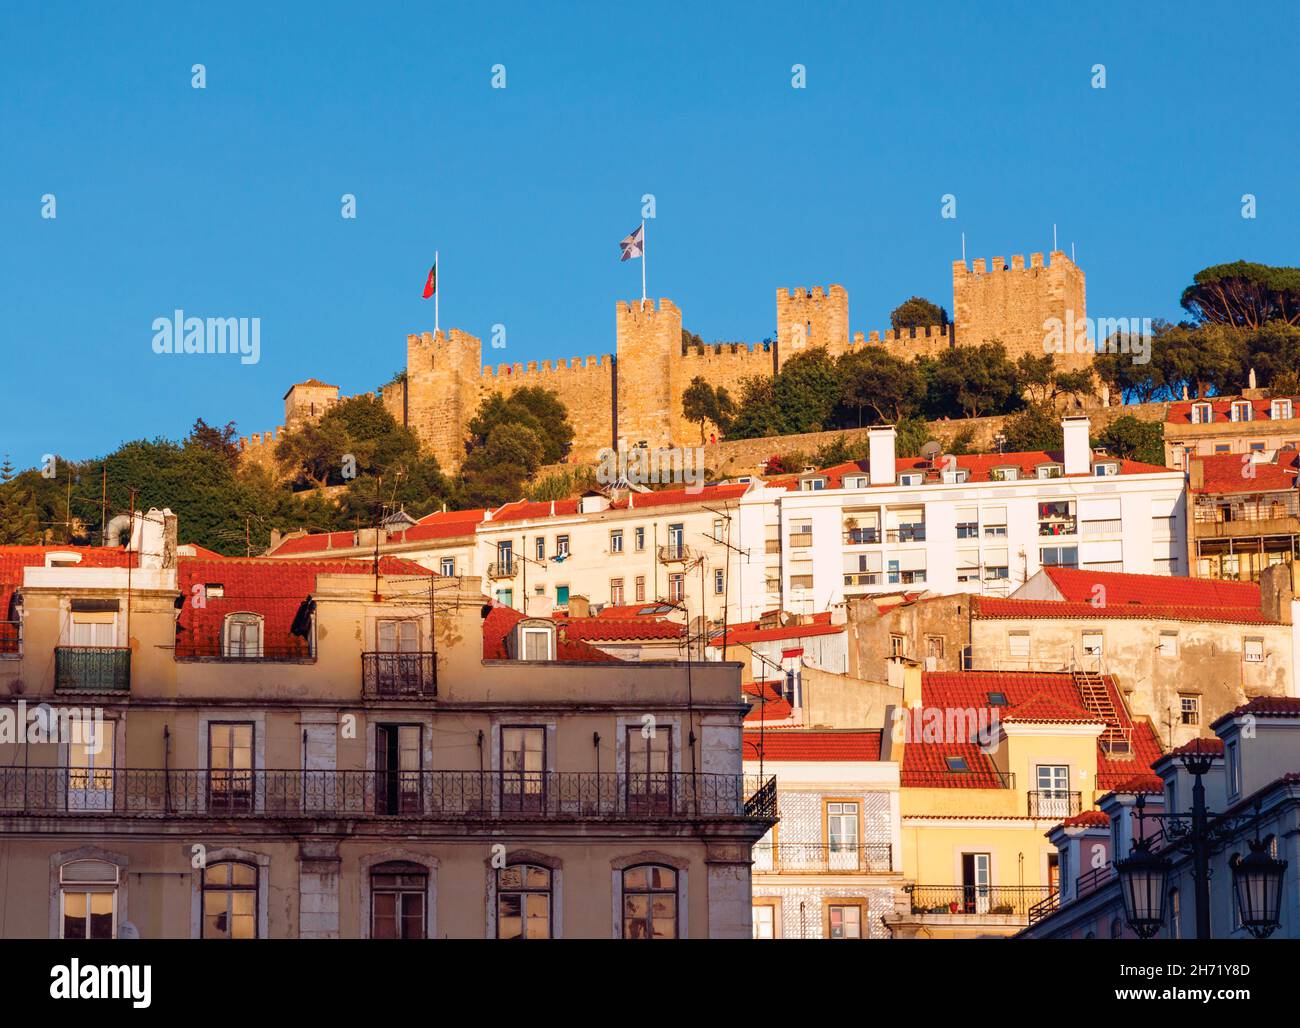 Lisbon, Portugal. Castelo de Sao Jorge seen from Praca da Figueira.  Castle of St George seen from the Figueira Square. Stock Photo